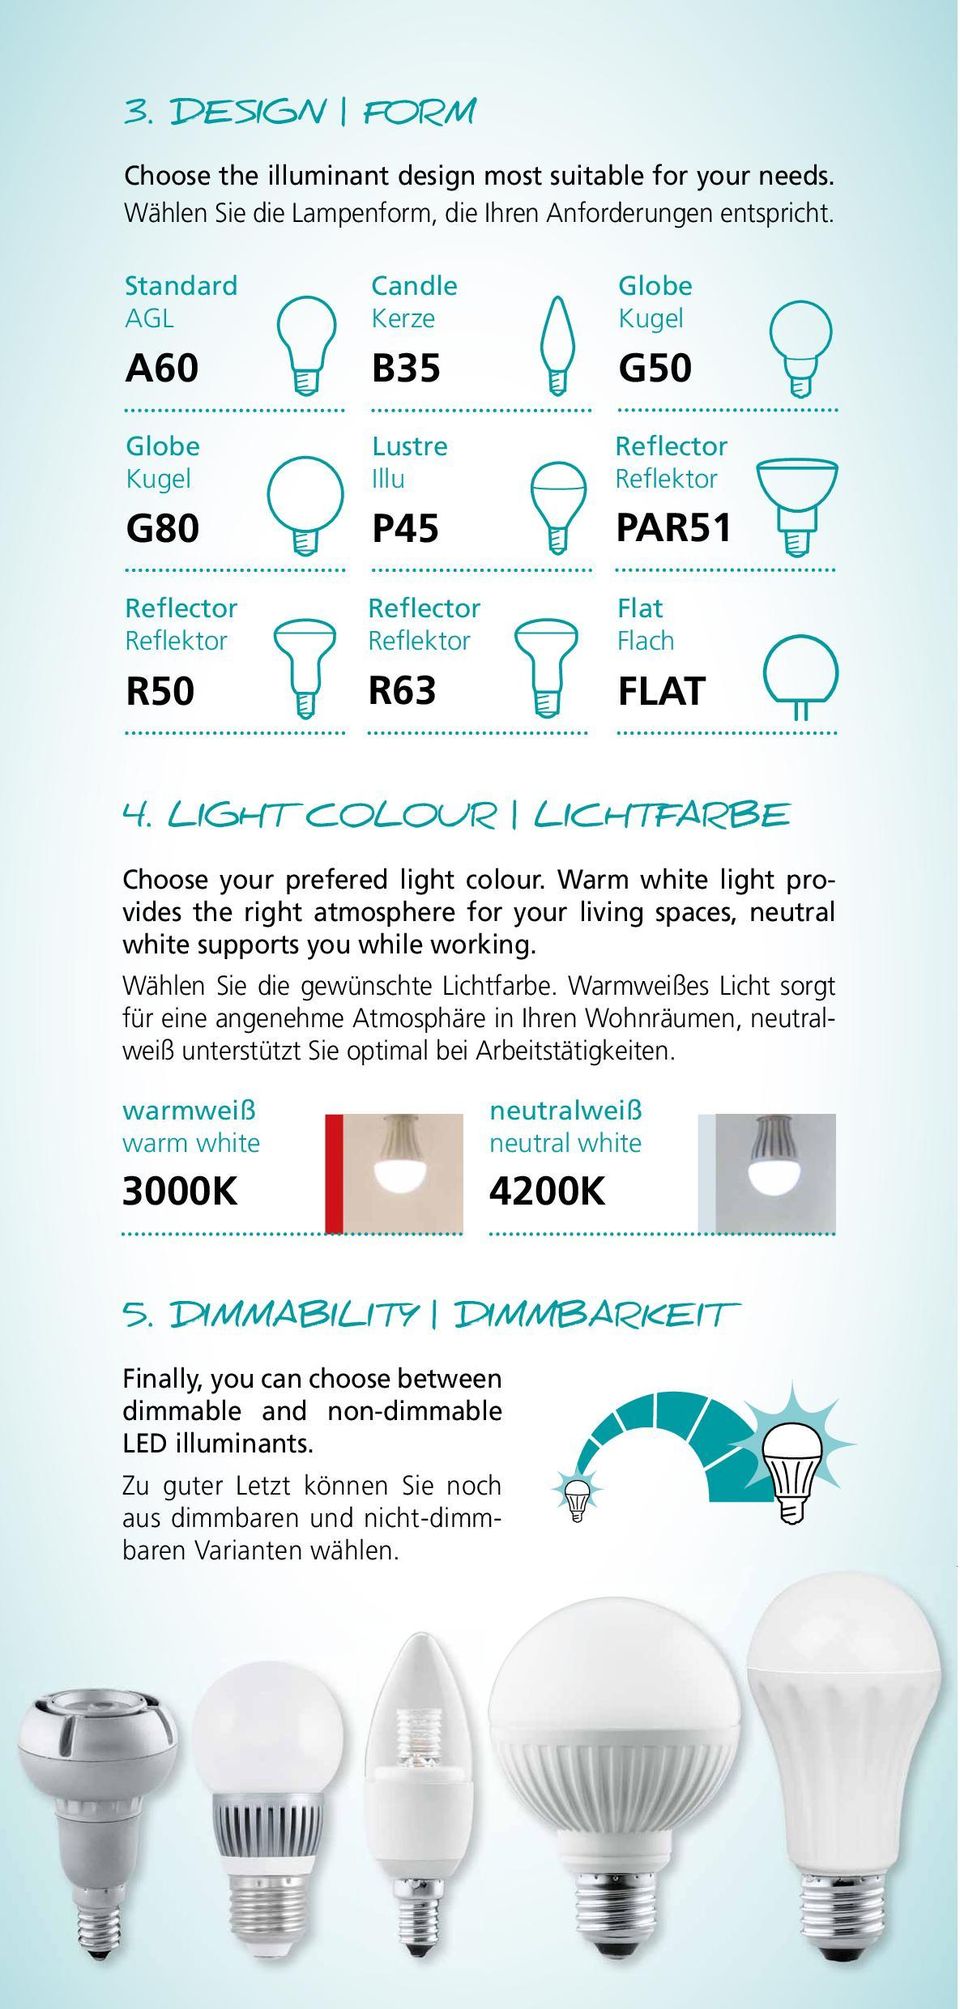 LIGHT COLOUR LICHTFARBE Choose your prefered light colour. Warm white light provides the right atmosphere for your living spaces, neutral white supports you while working.